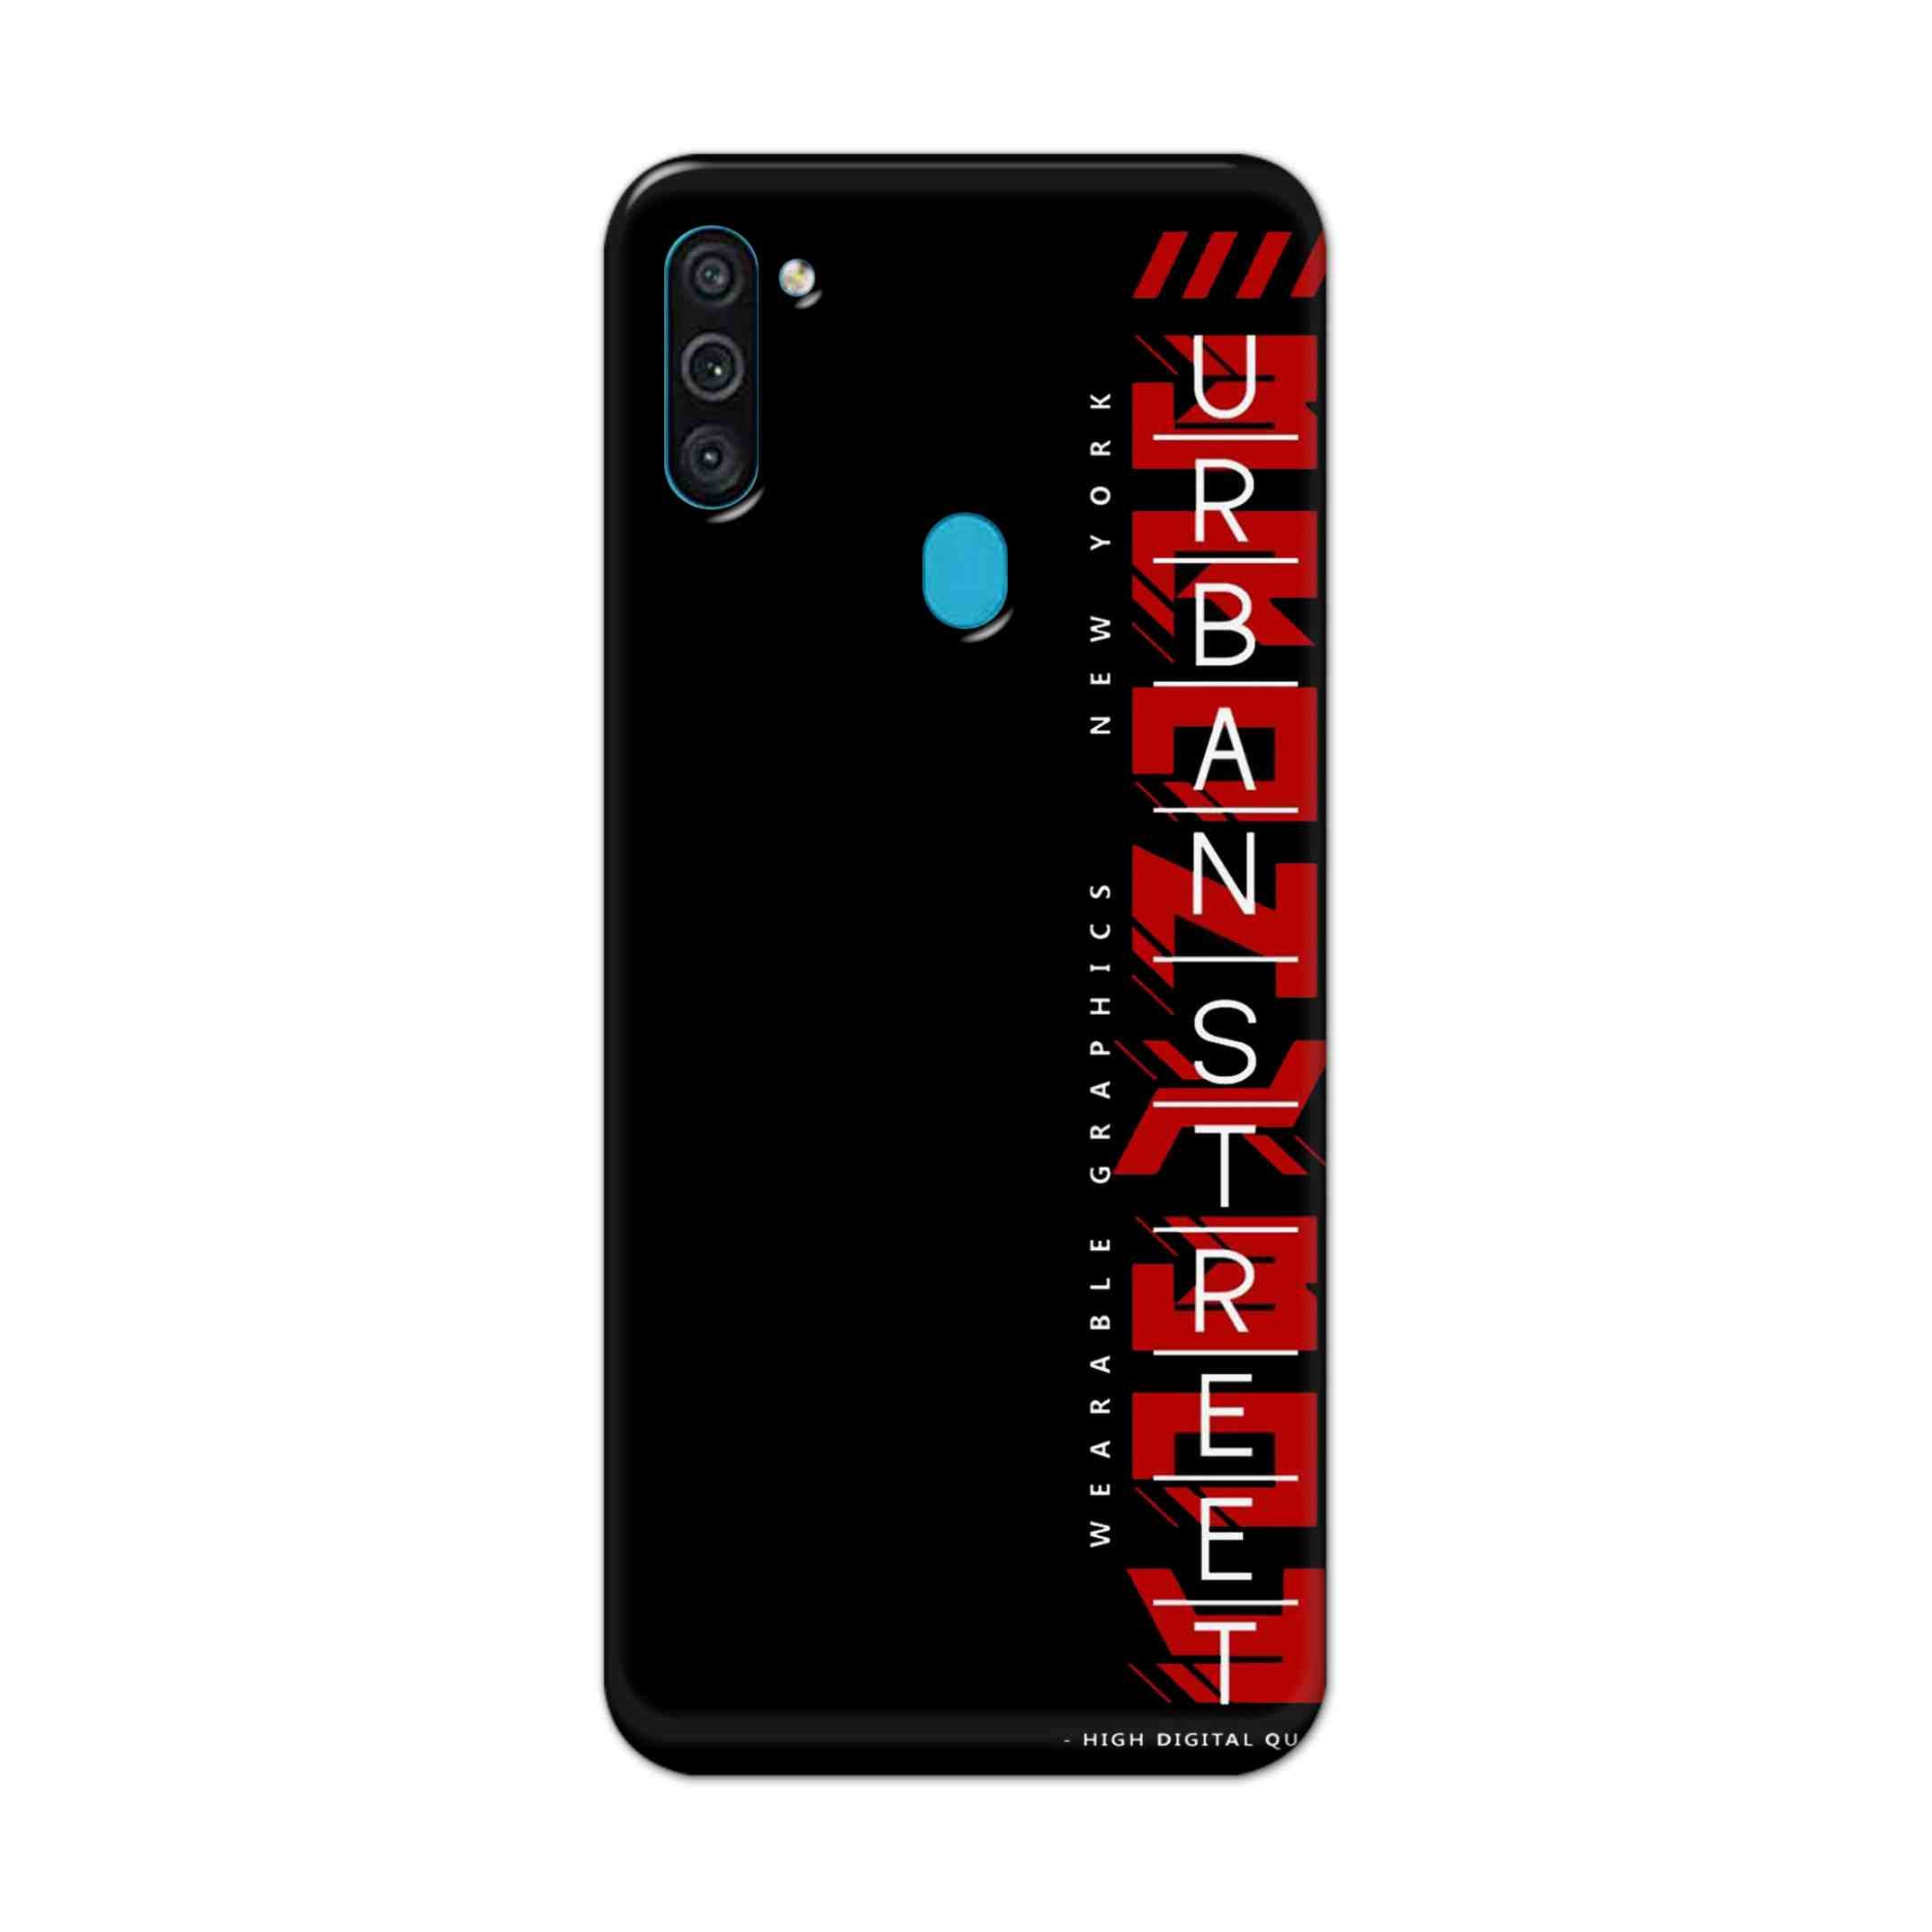 Buy Urban Street Hard Back Mobile Phone Case Cover For Samsung Galaxy M11 Online